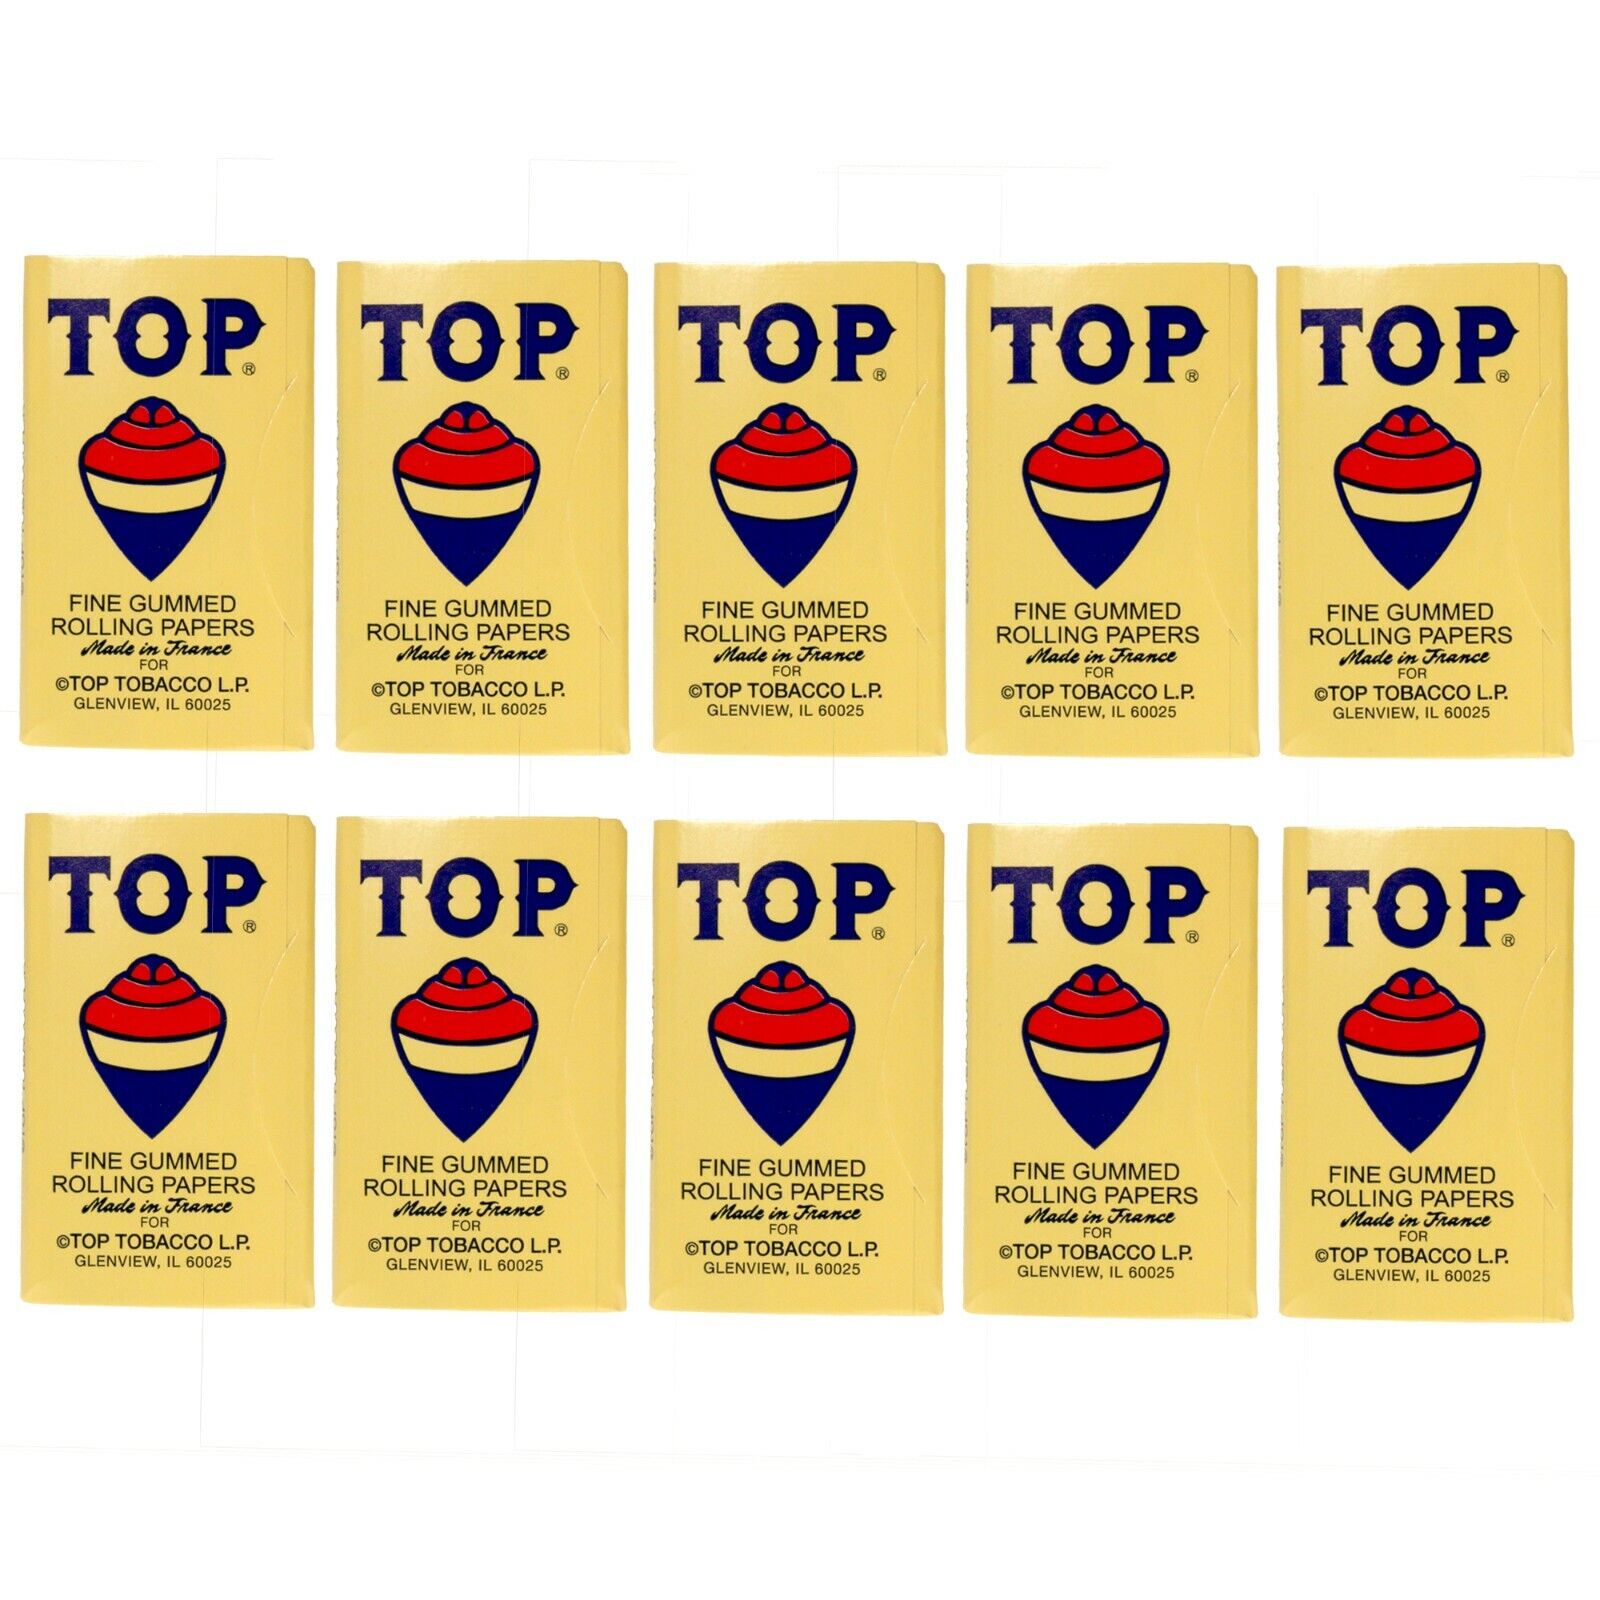 10 x TOP Cigarette Rolling Paper 100 Papers per Booklet - Free Express Shipping